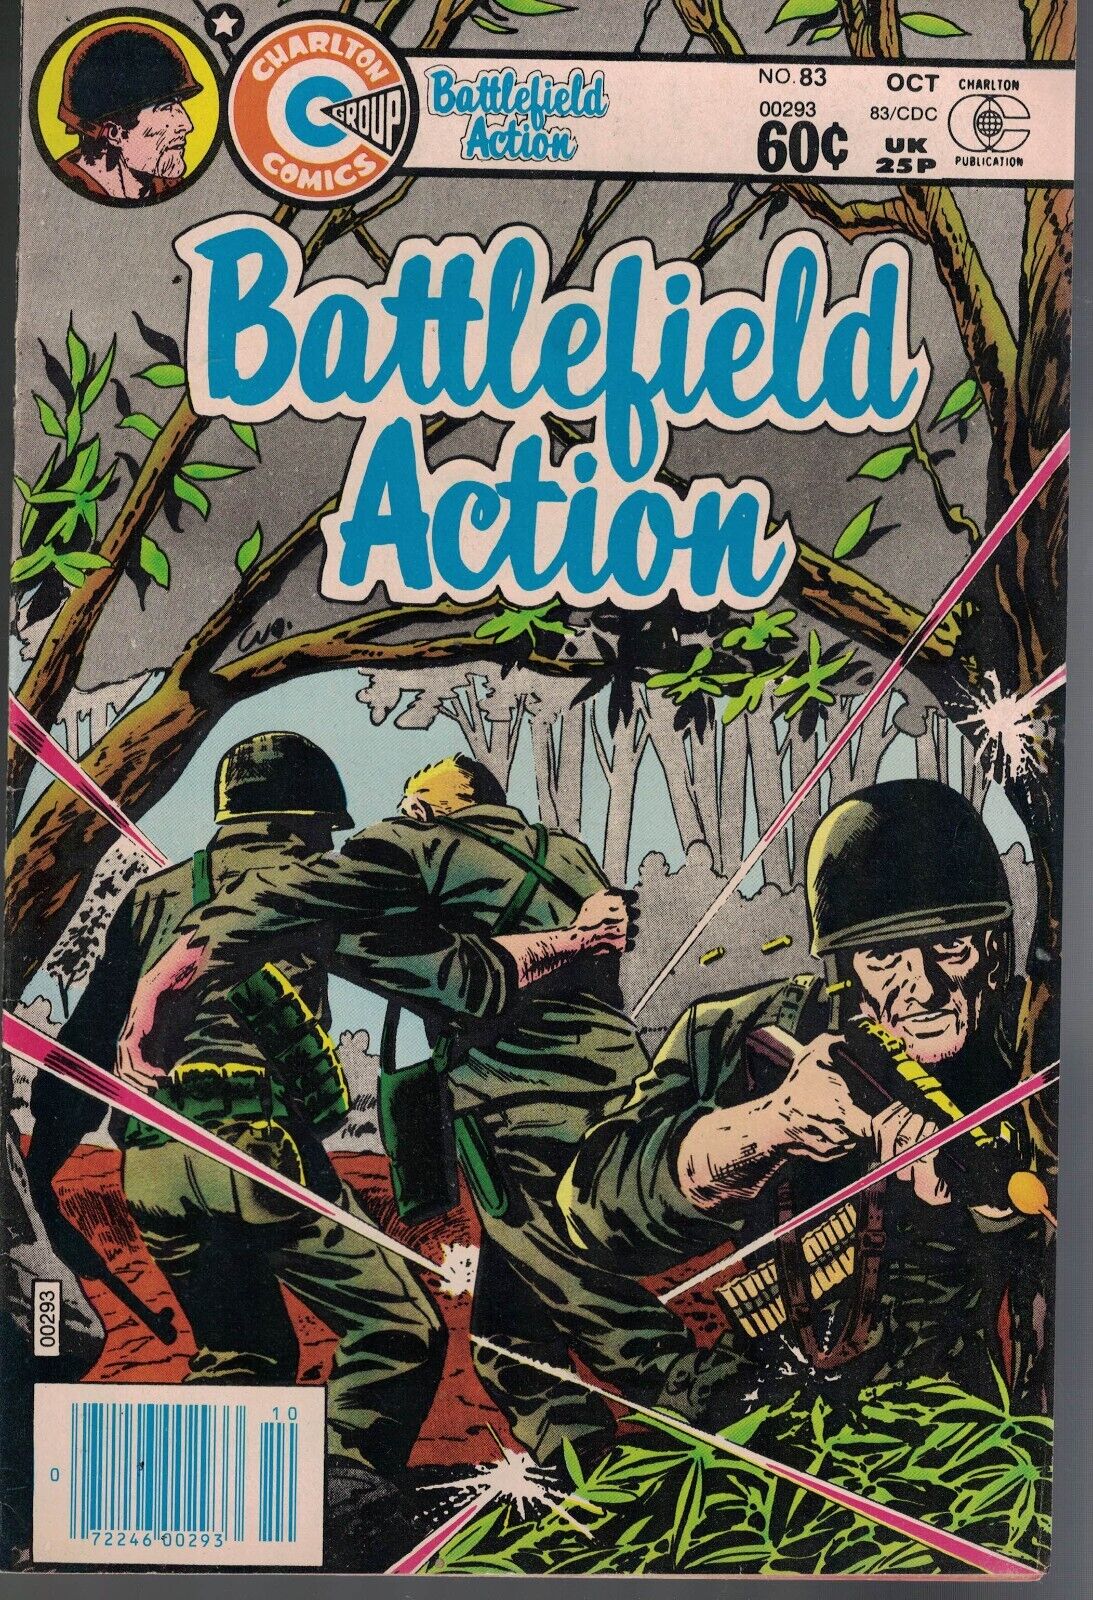 1983 Battlefield Action #82 - Scarce and Stored since purchase